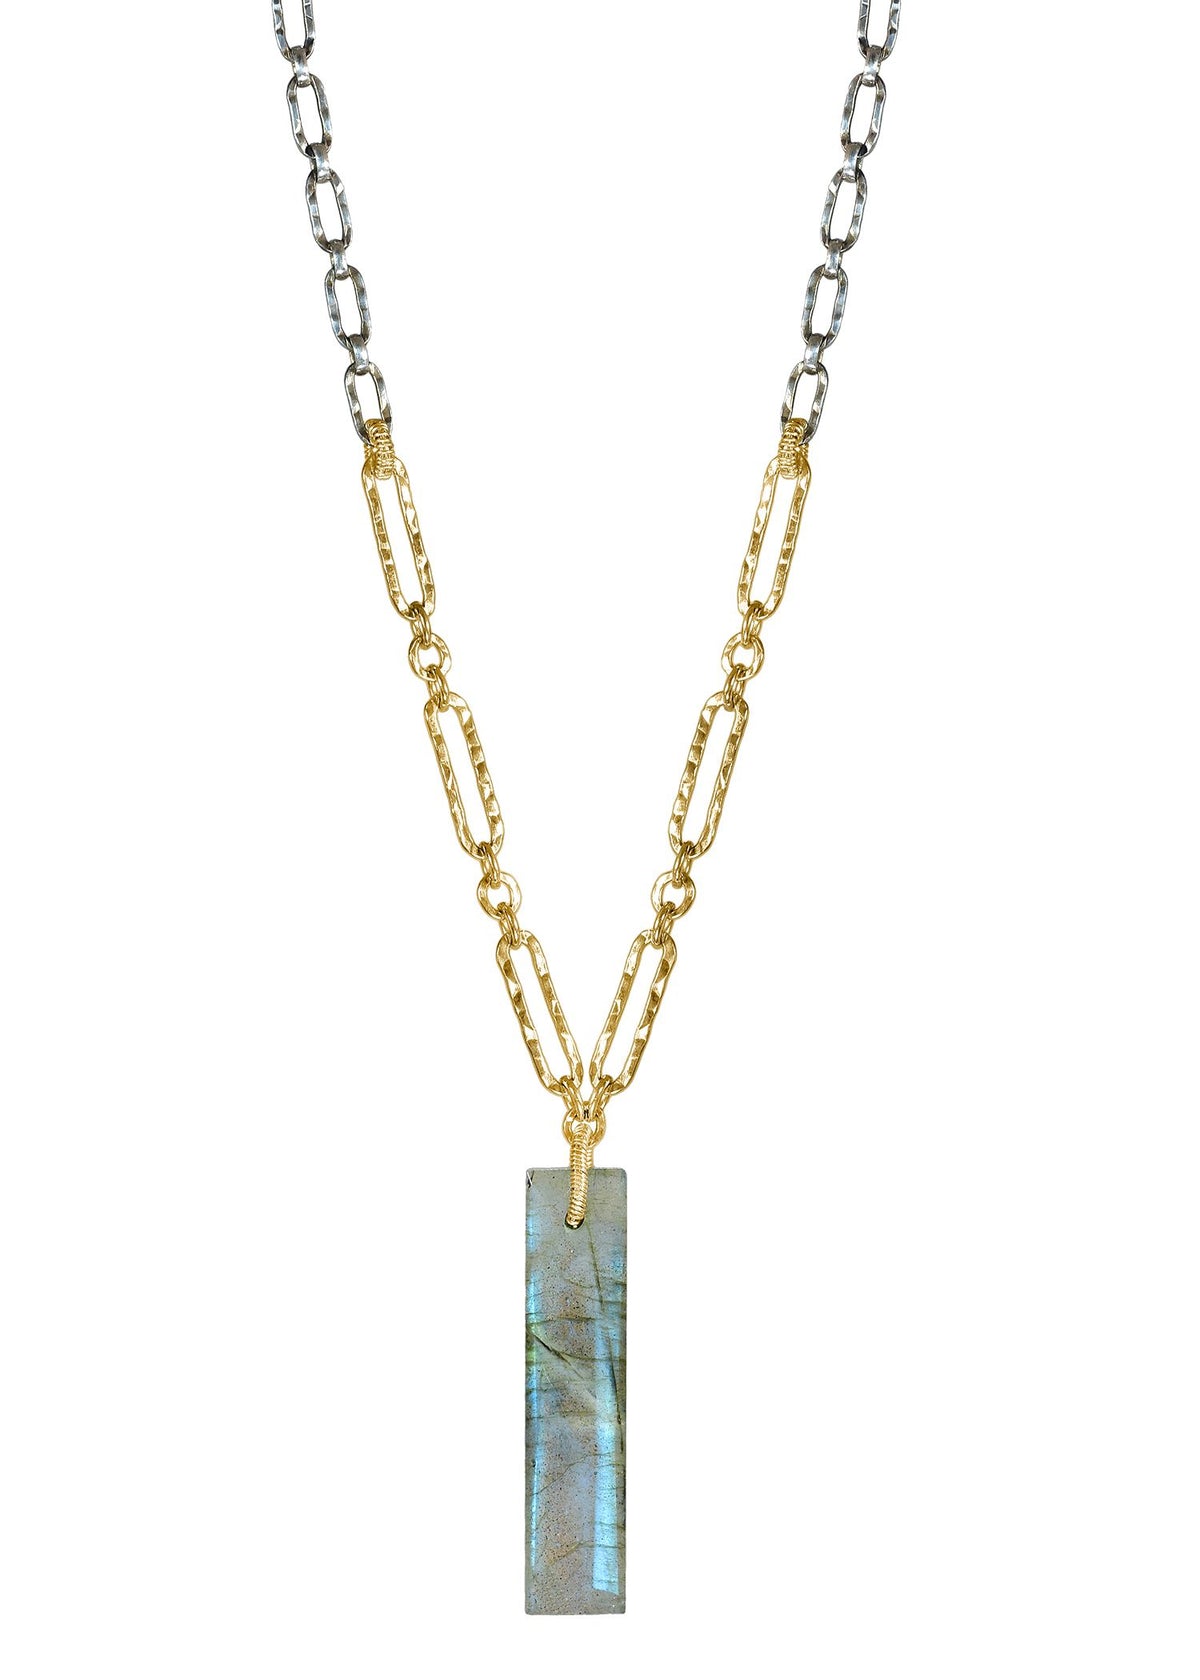 Labradorite 14k gold fill Sterling silver Mixed metal Necklace measures 20-1/4” in length Pendant measures 1-1/4” in length and 1/4” in width Handmade in our Los Angeles studio